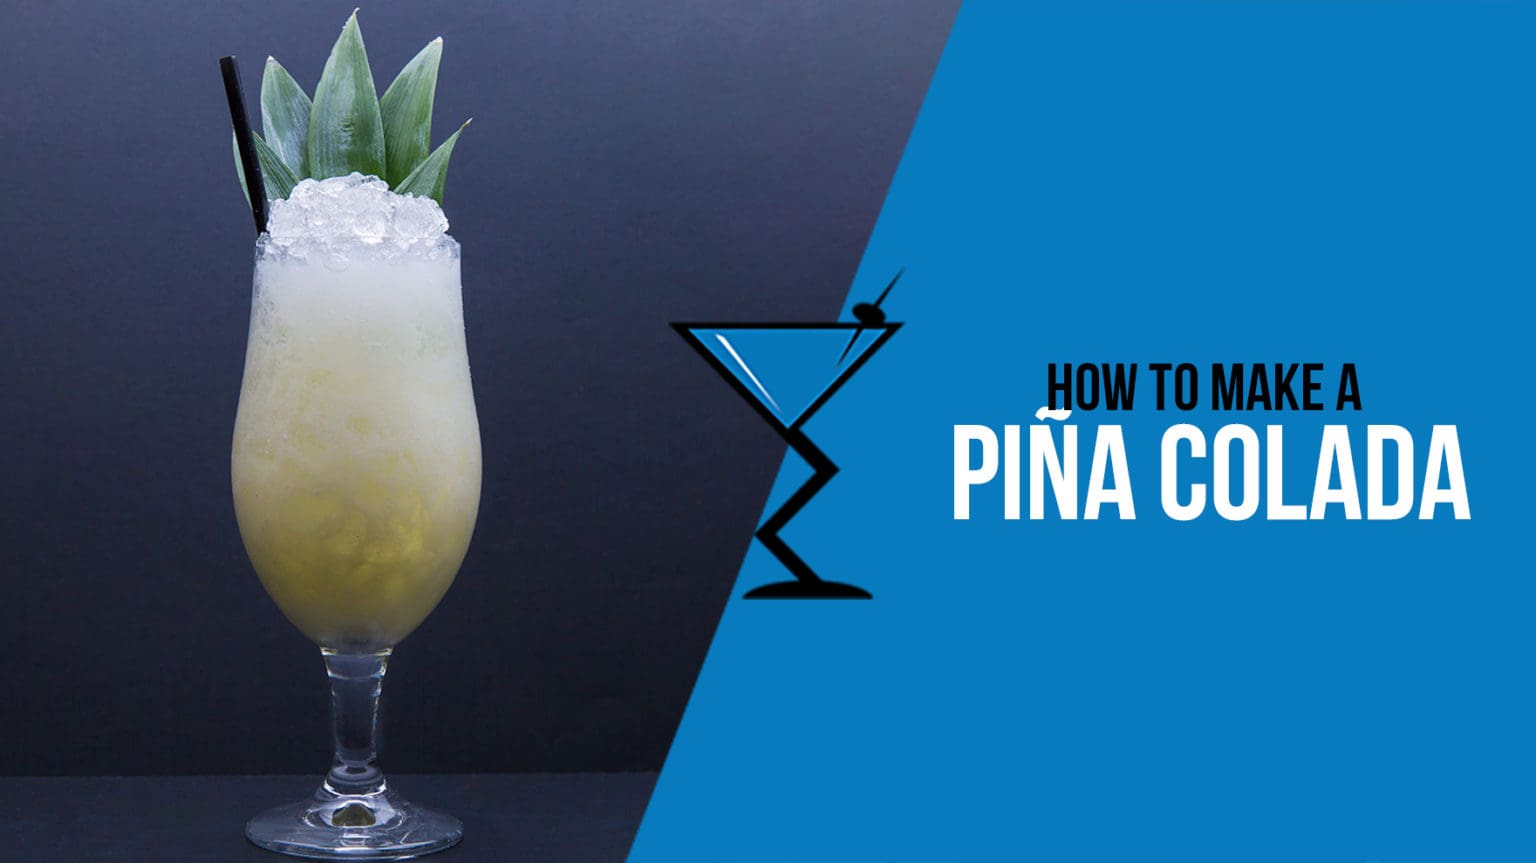 FREE Cocktail Recipes & Drink Recipes thanks to DrinkLab